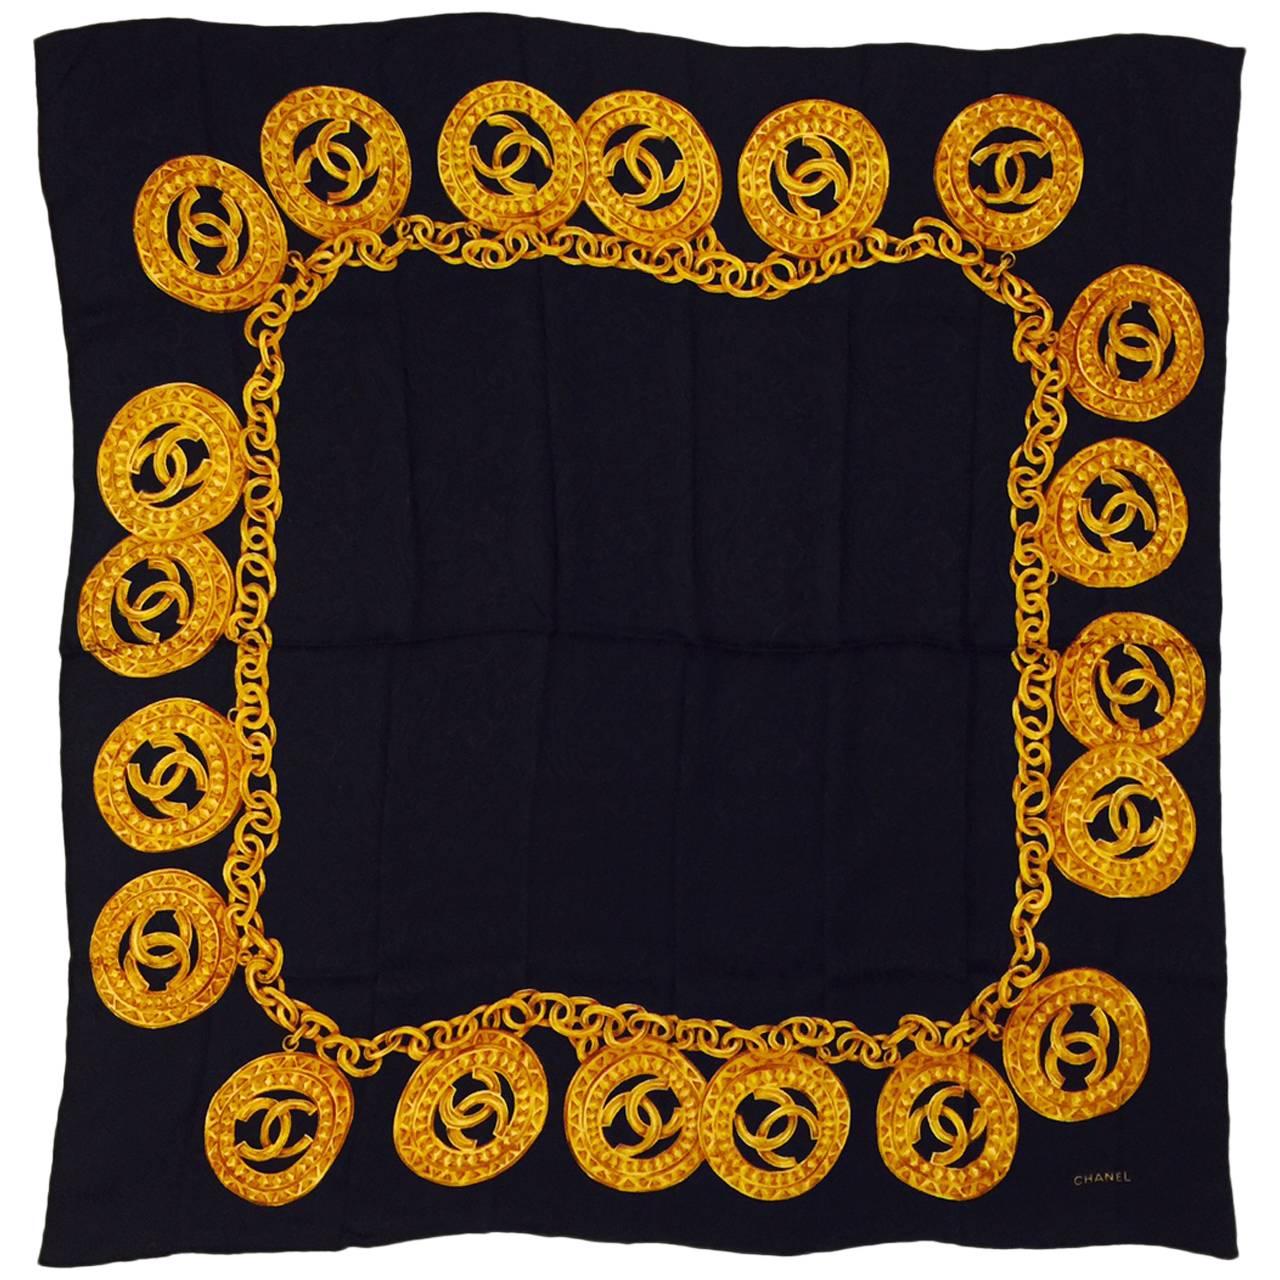 Chanel Black Paisley Silk Jacquard Scarf W Gold Chain & Double C Medallions